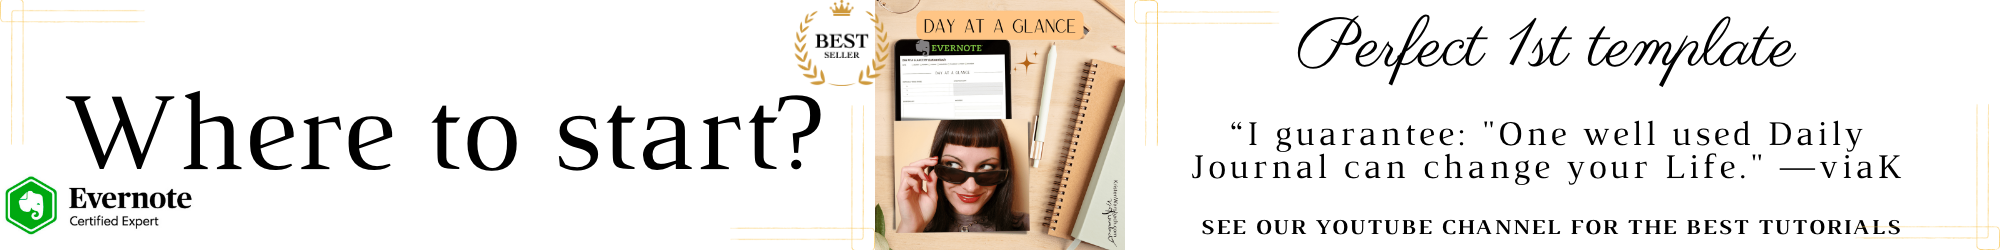 Evernote Day at a Glance Planner by Kristen Wambach Evernote Expert